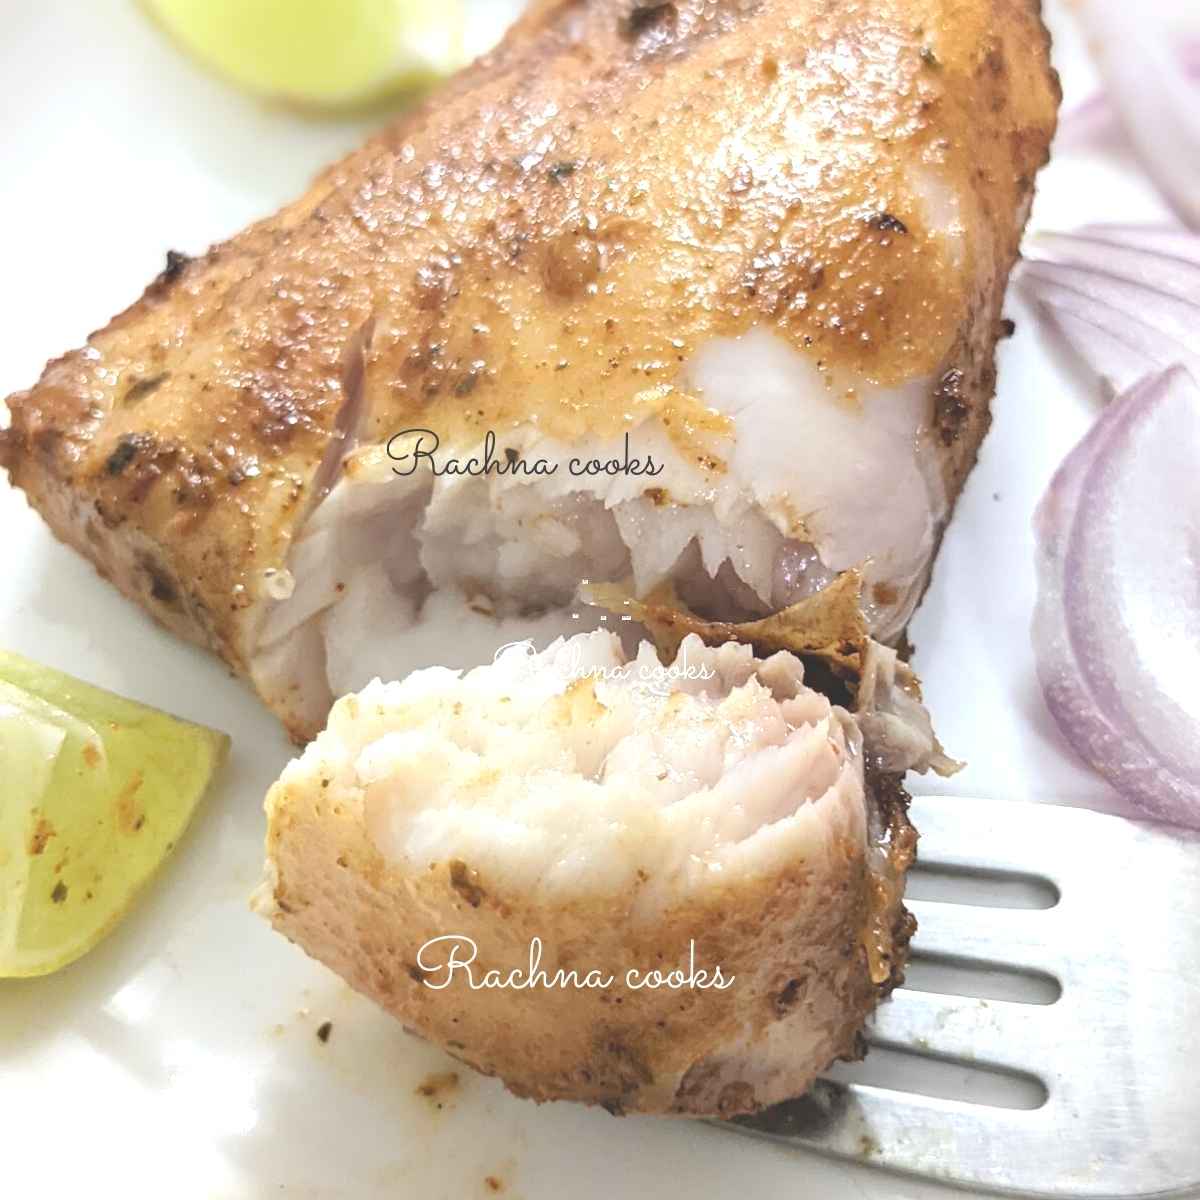 Cooked mahi mahi fillet with a piece broken off showing its flaky flesh done to perfection